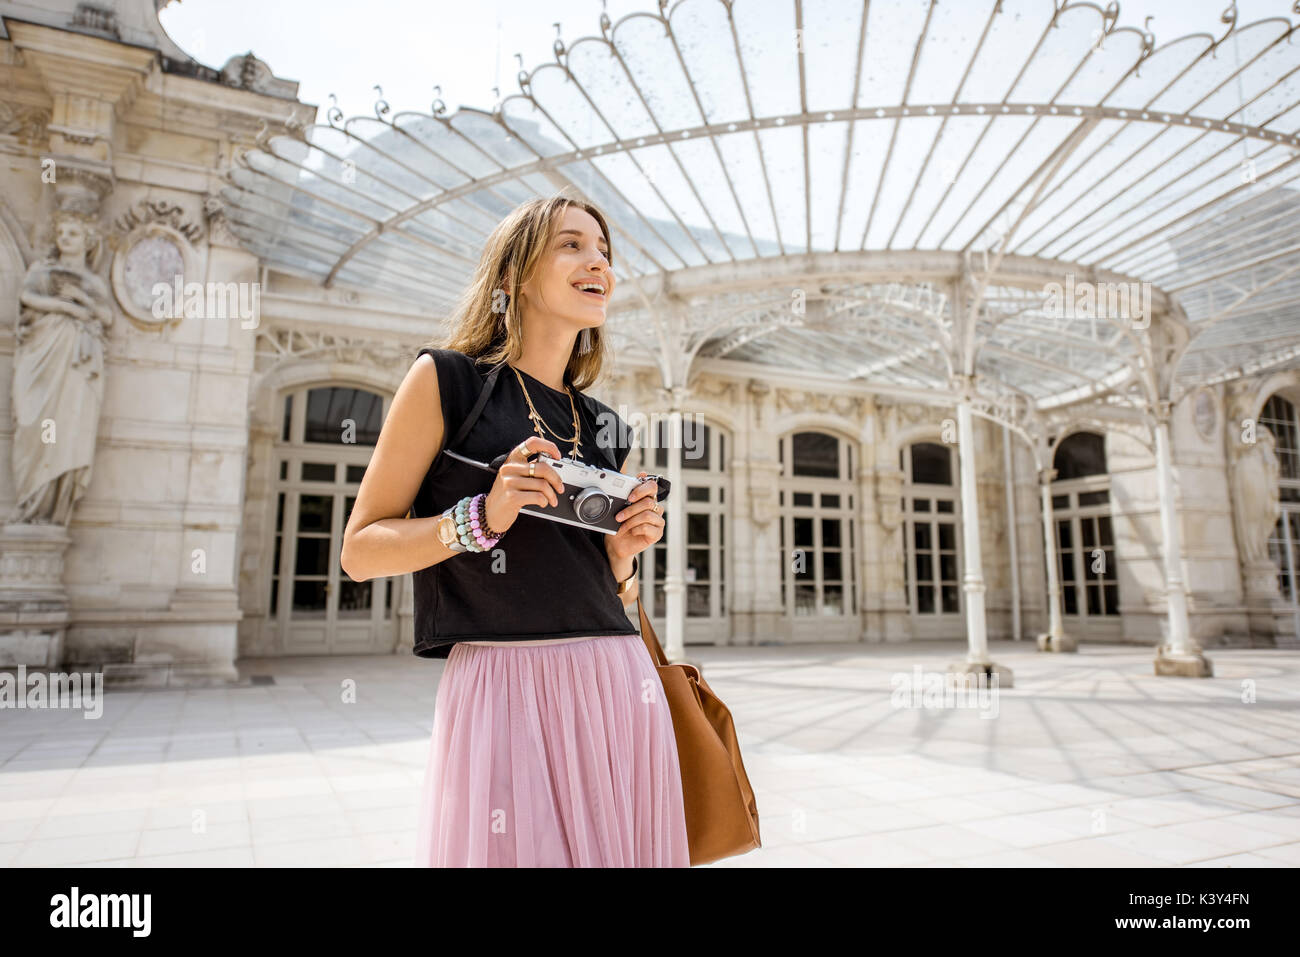 Woman near the old beautiful building in Vichy city, France Stock Photo